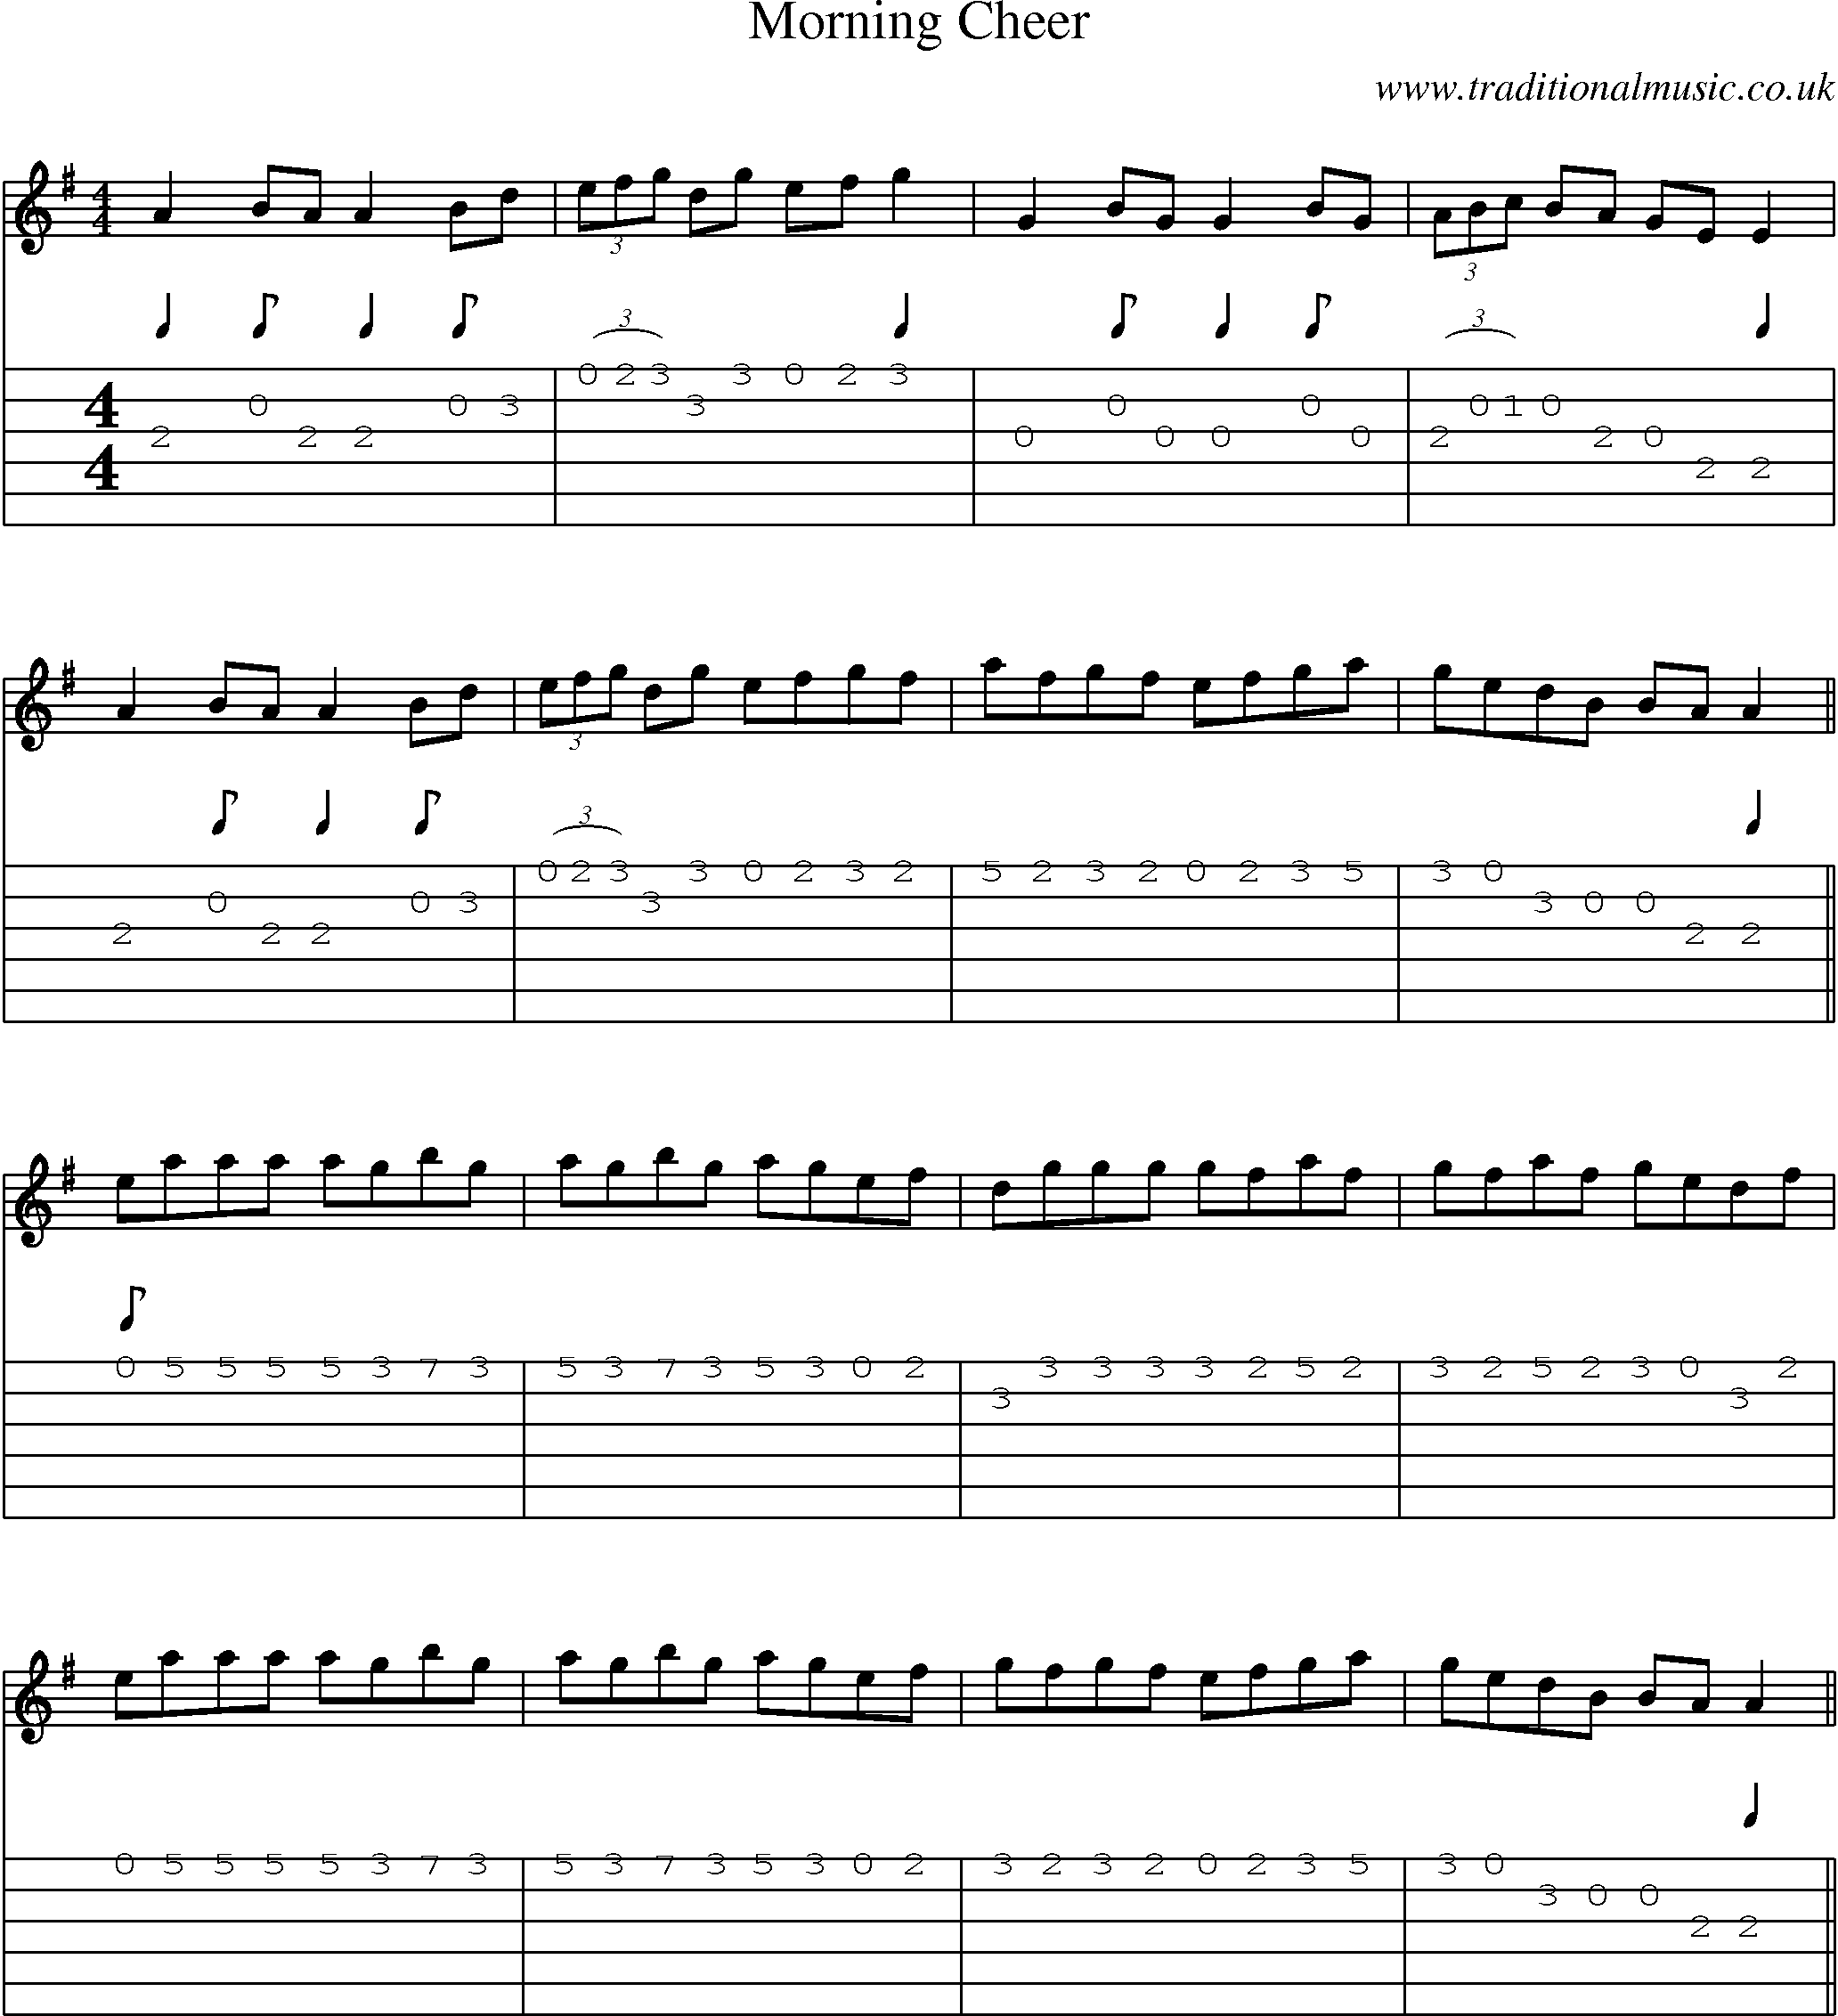 Music Score and Guitar Tabs for Morning Cheer